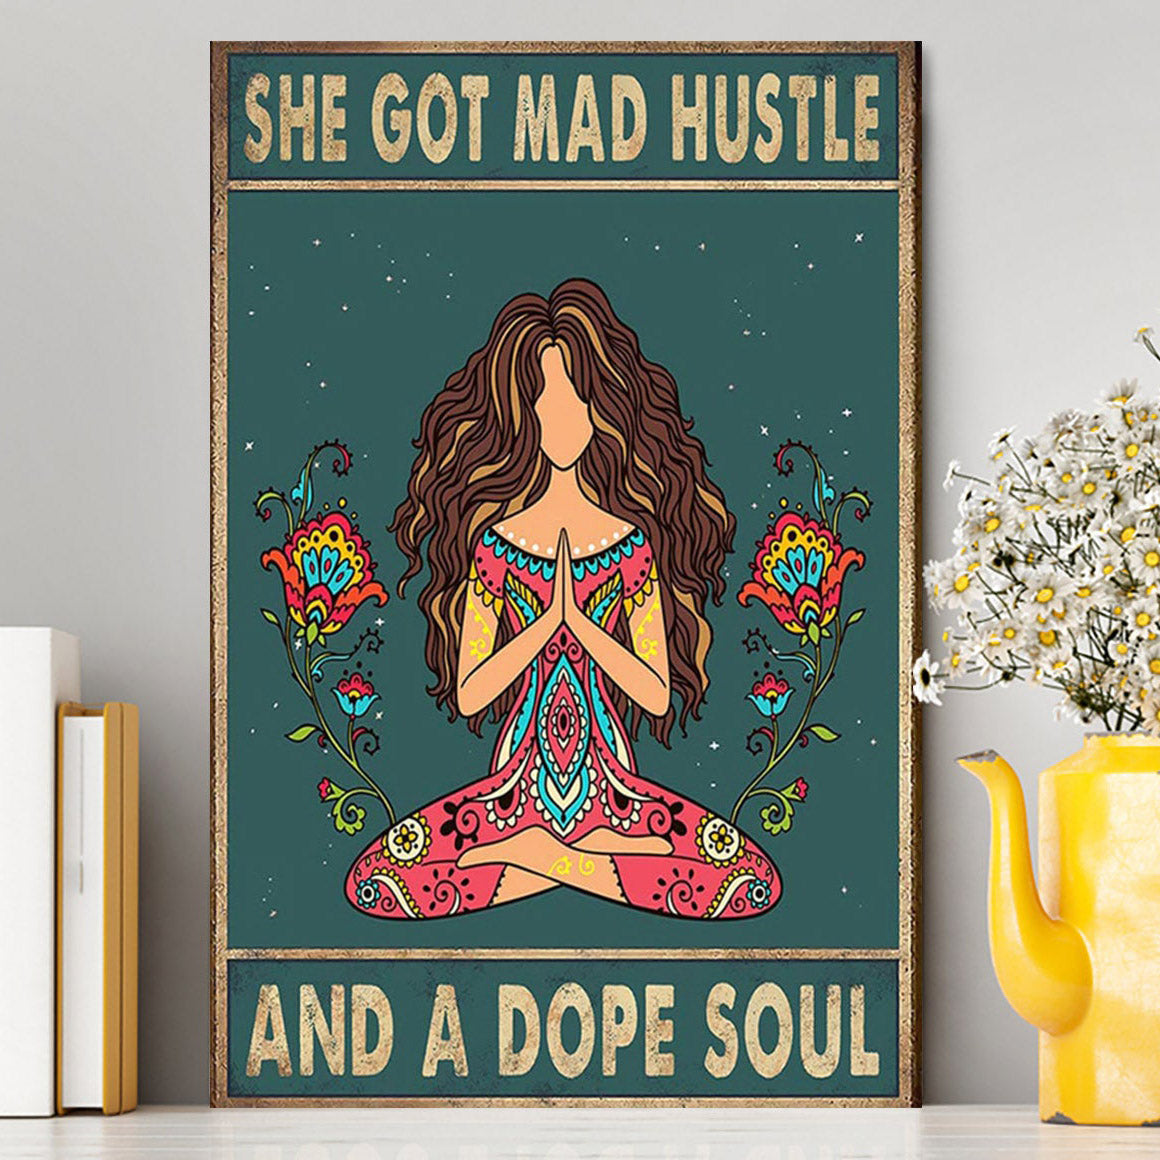 She Got Mad Hustle And A Dope Soul Canvas Wall Art - Room Decor For Teen Girls